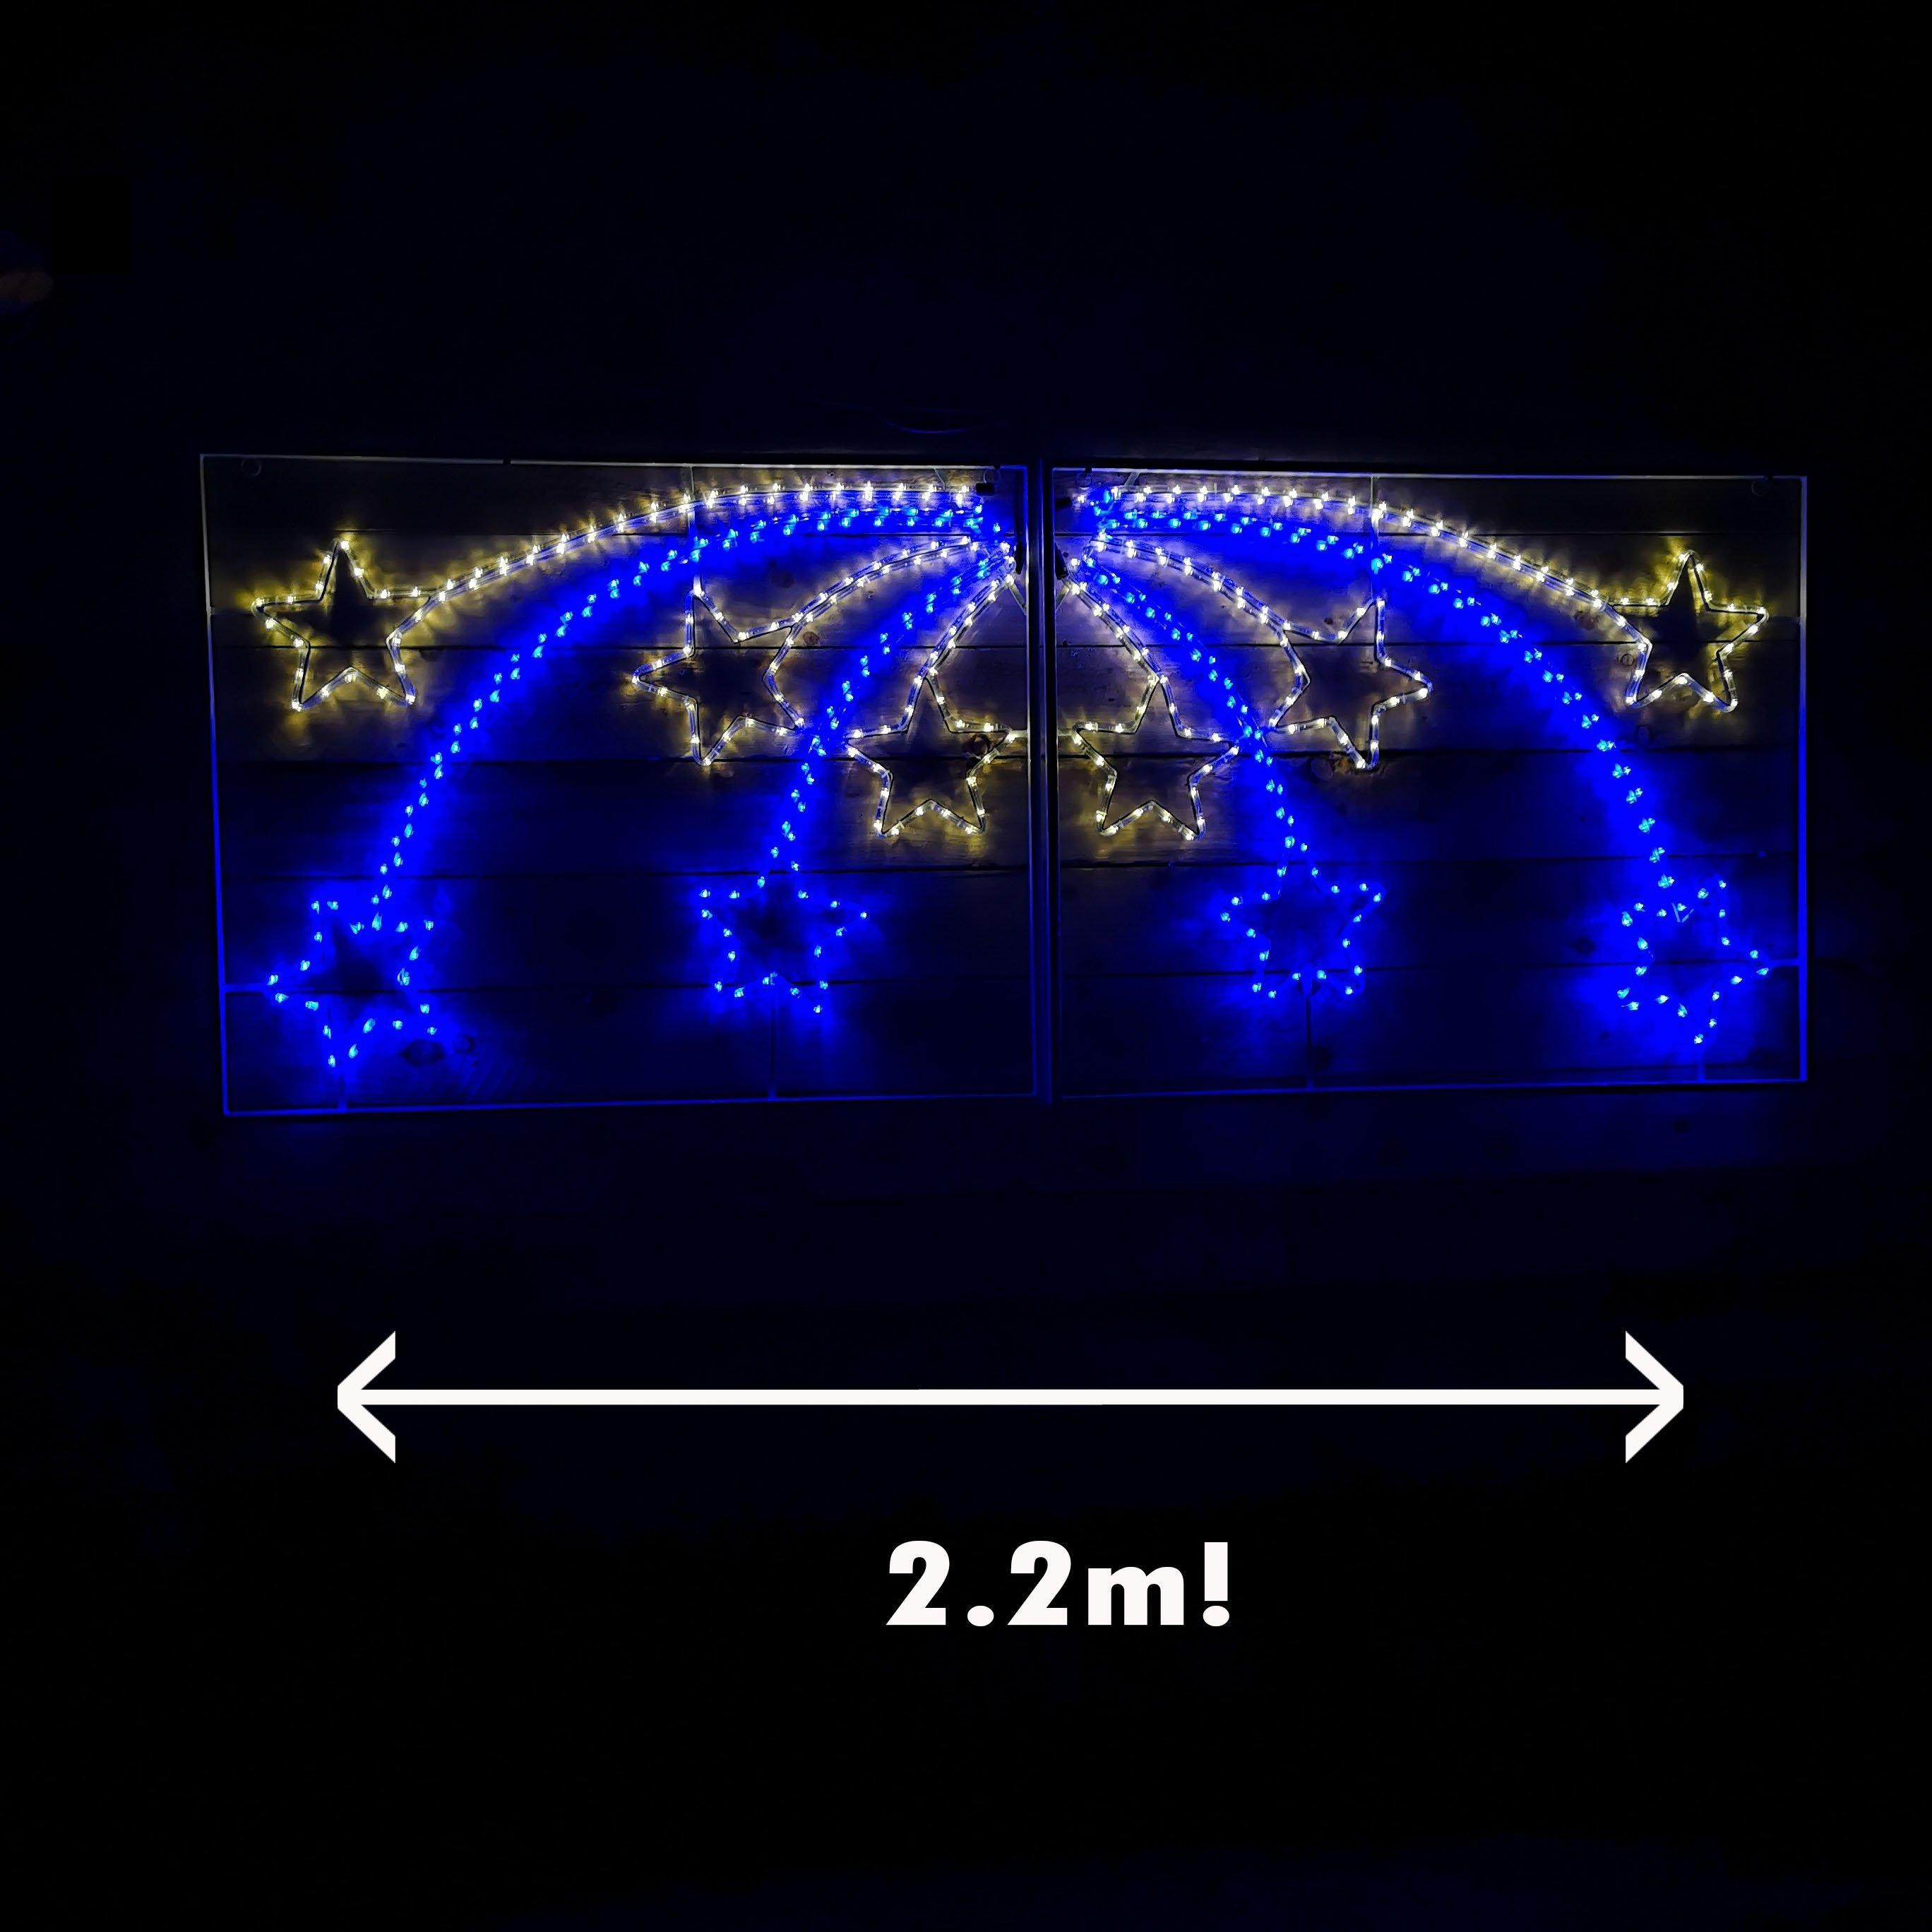 2.2m LED Shooting Star Rope Light Christmas Silhouette Decoration in Blue and White - image 1